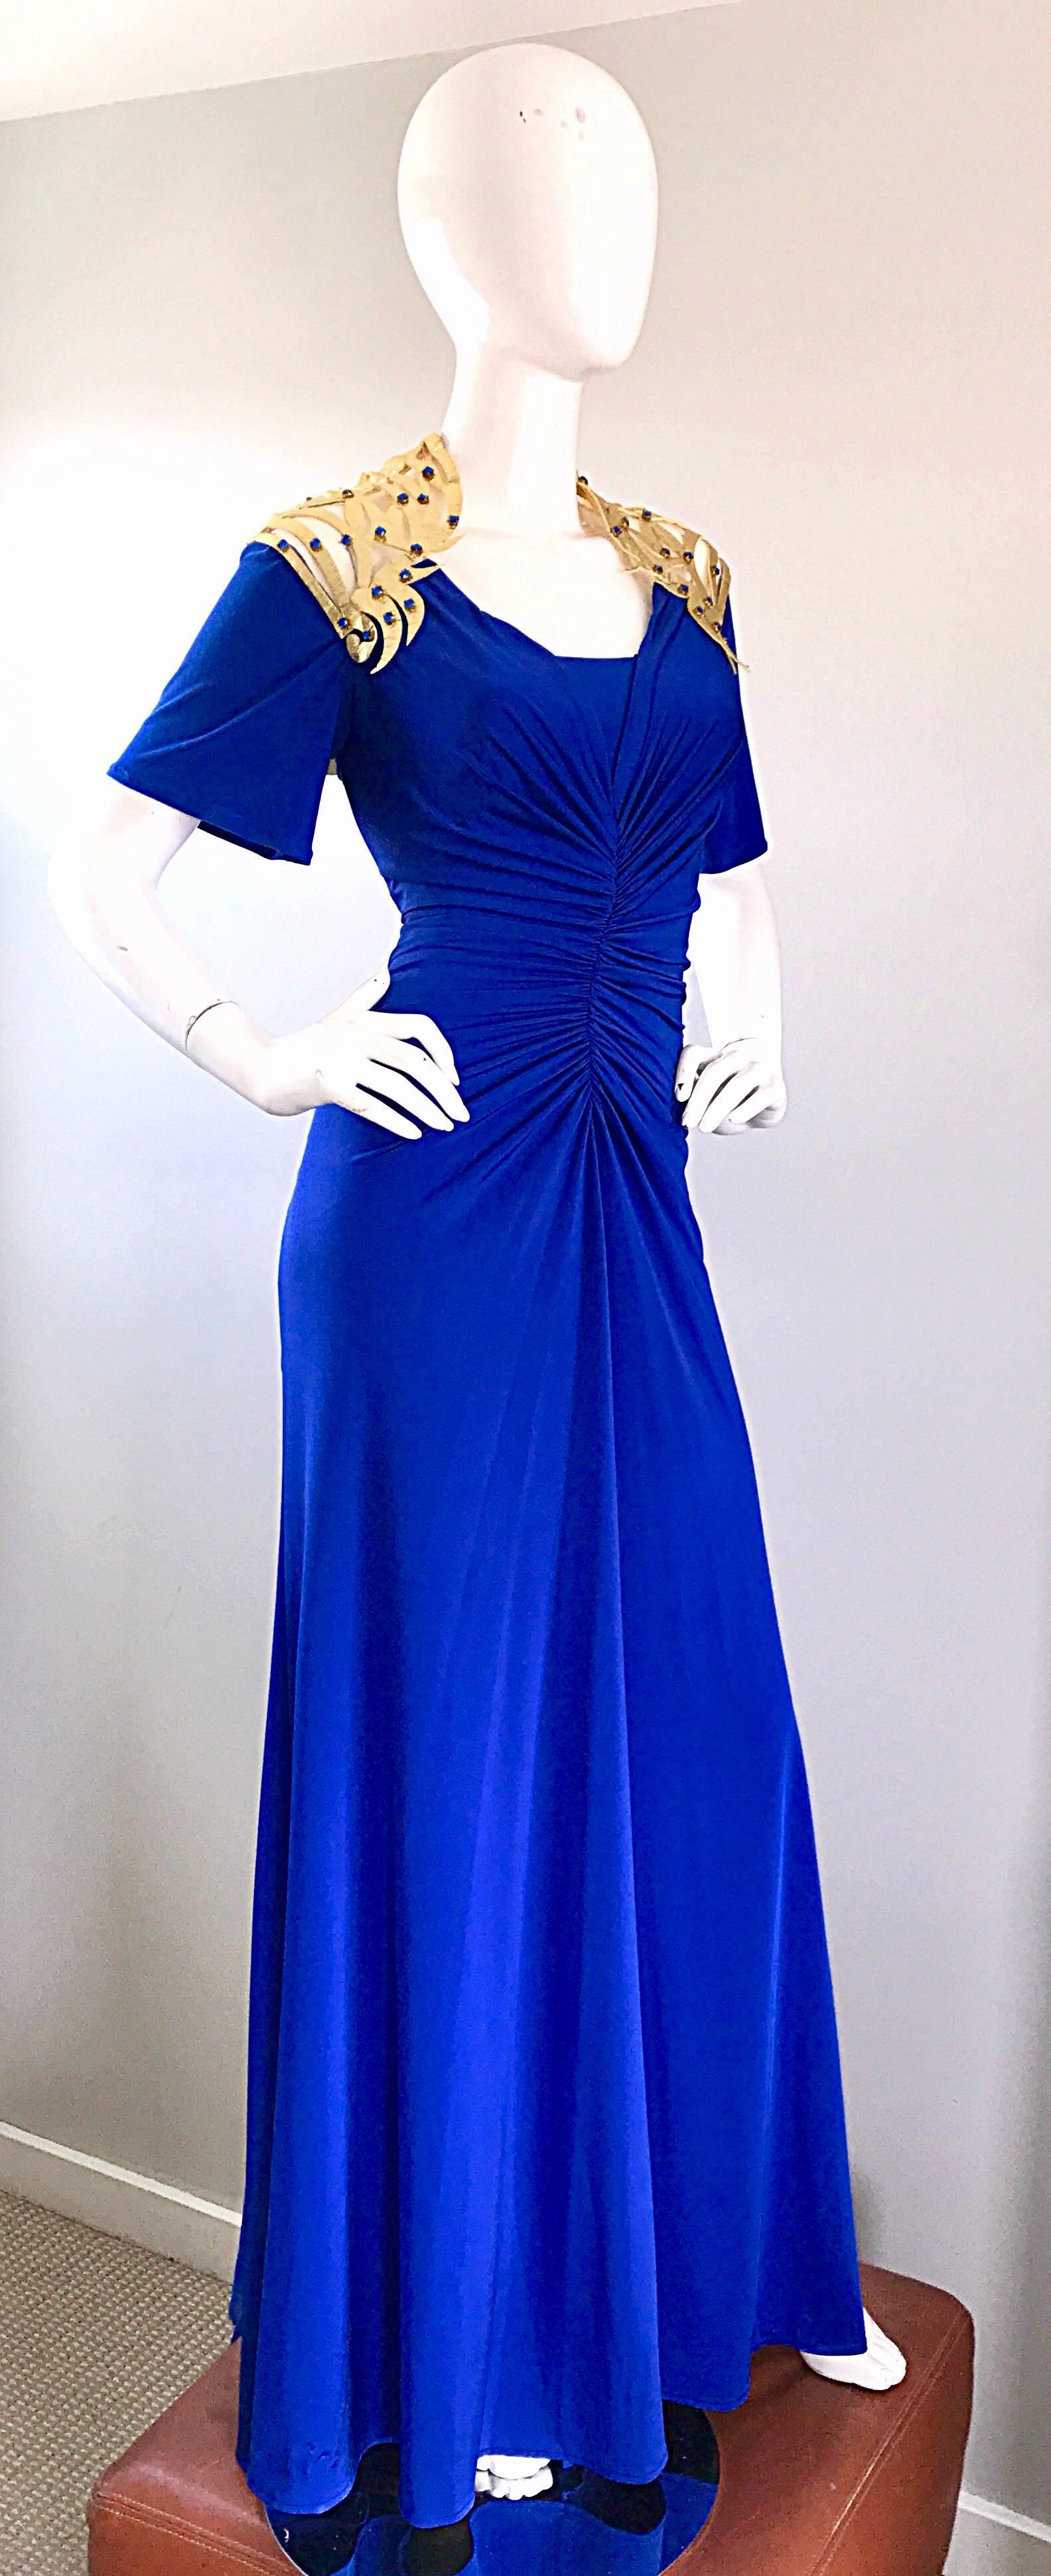 Women's Incredible Vintage Royal Blue Jersey + Gold Leather Beaded Grecian Evening Gown